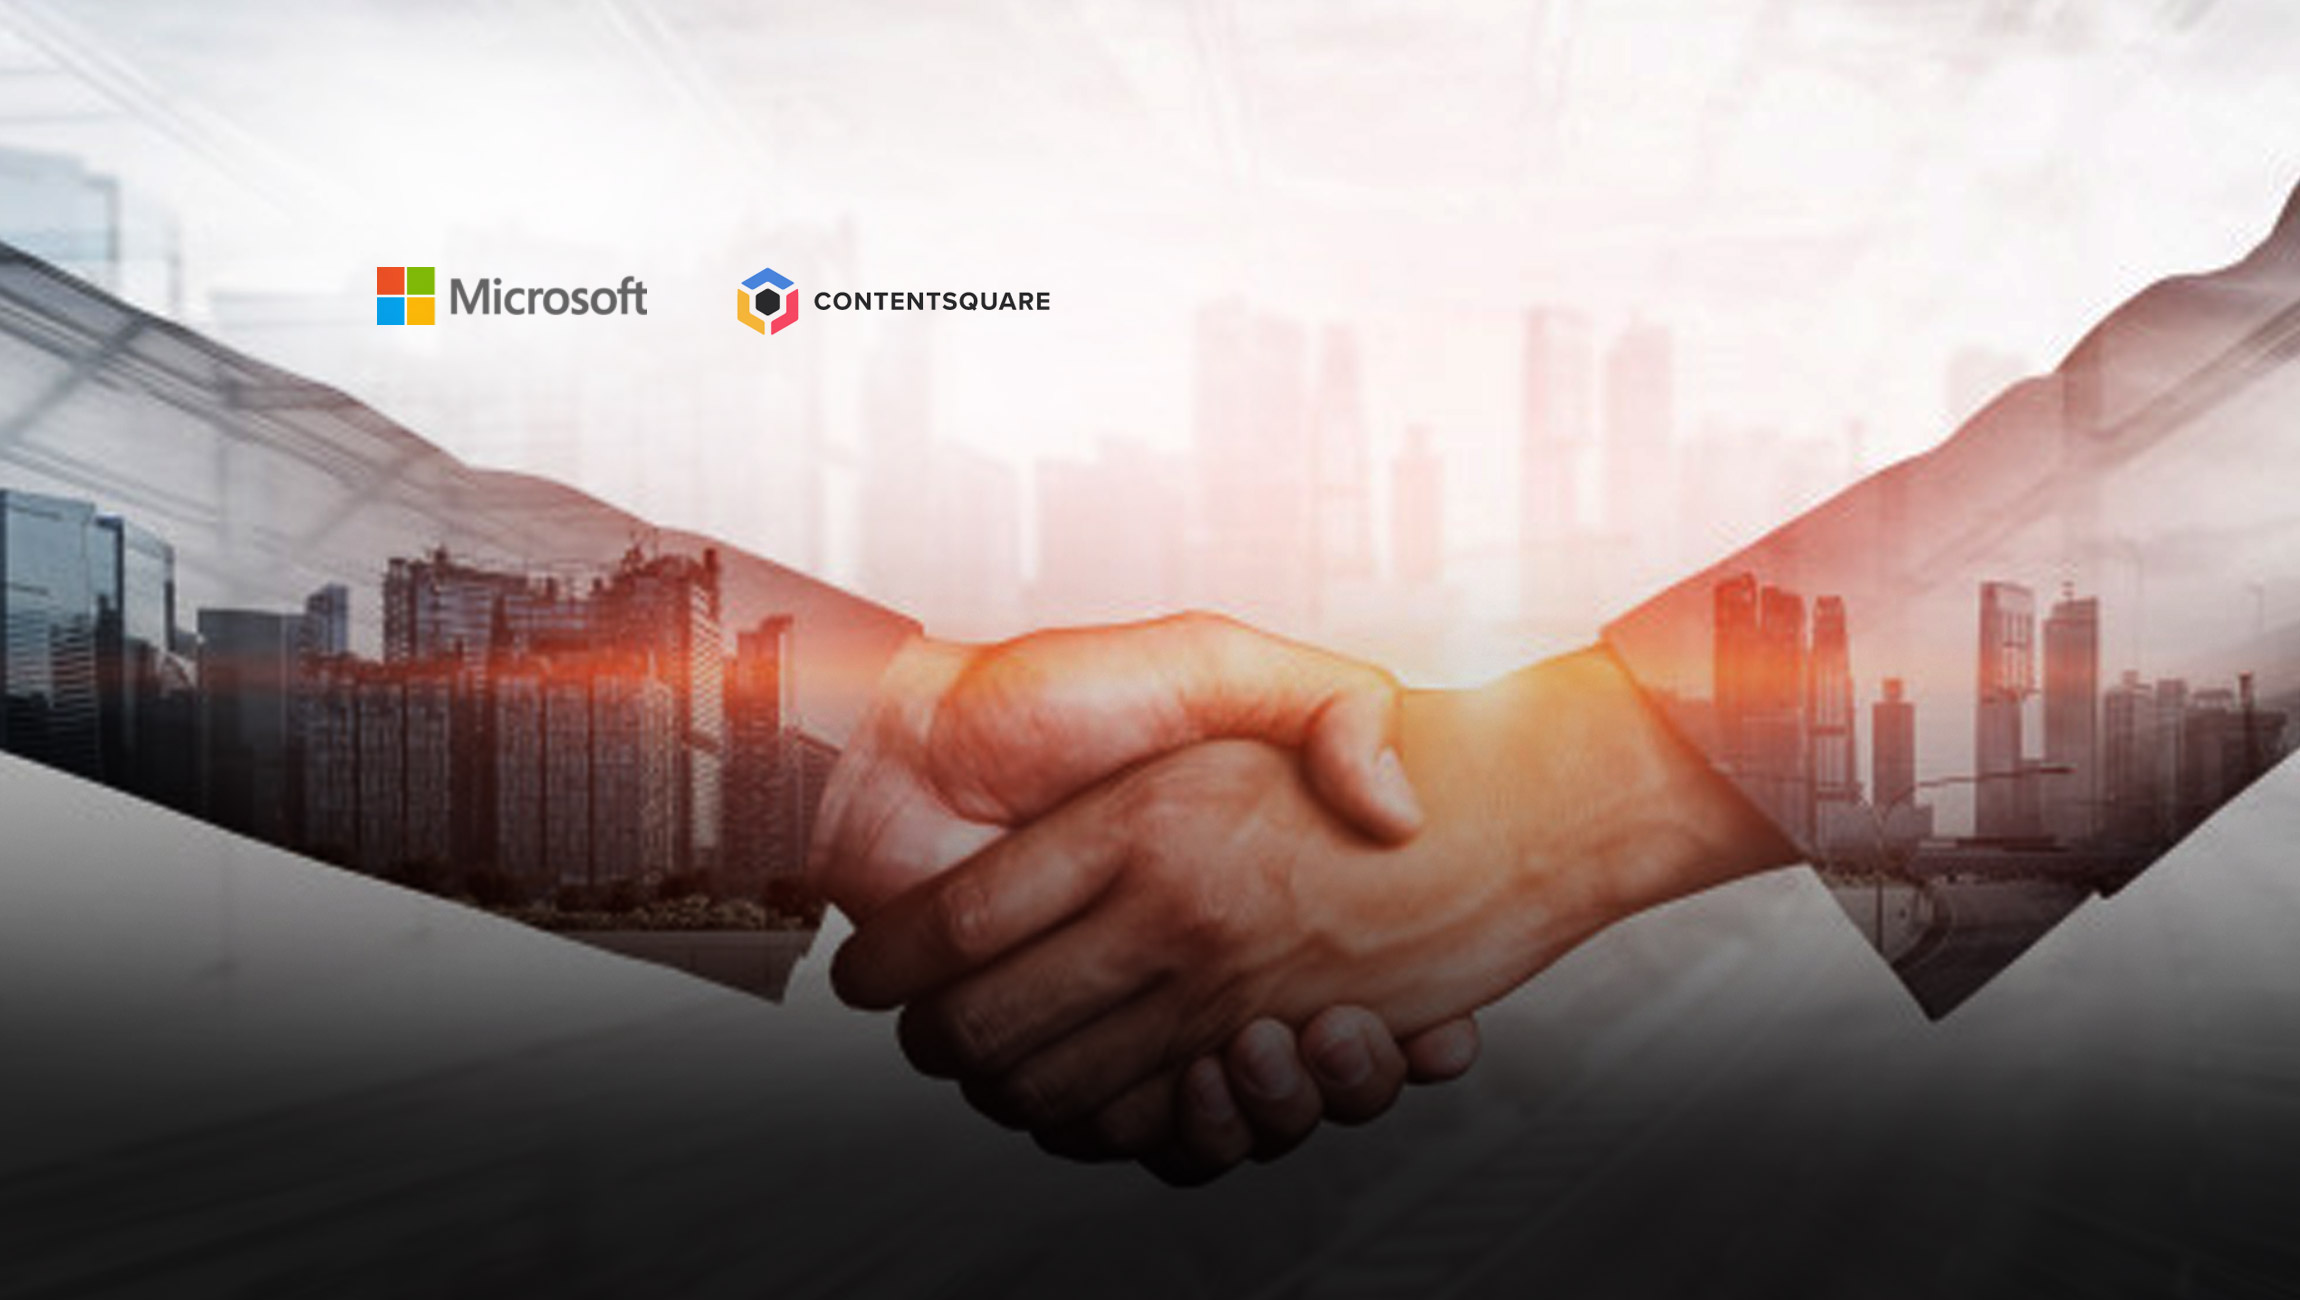 Microsoft and Experience Analytics Leader Contentsquare Join Forces to Accelerate Digital Transformation